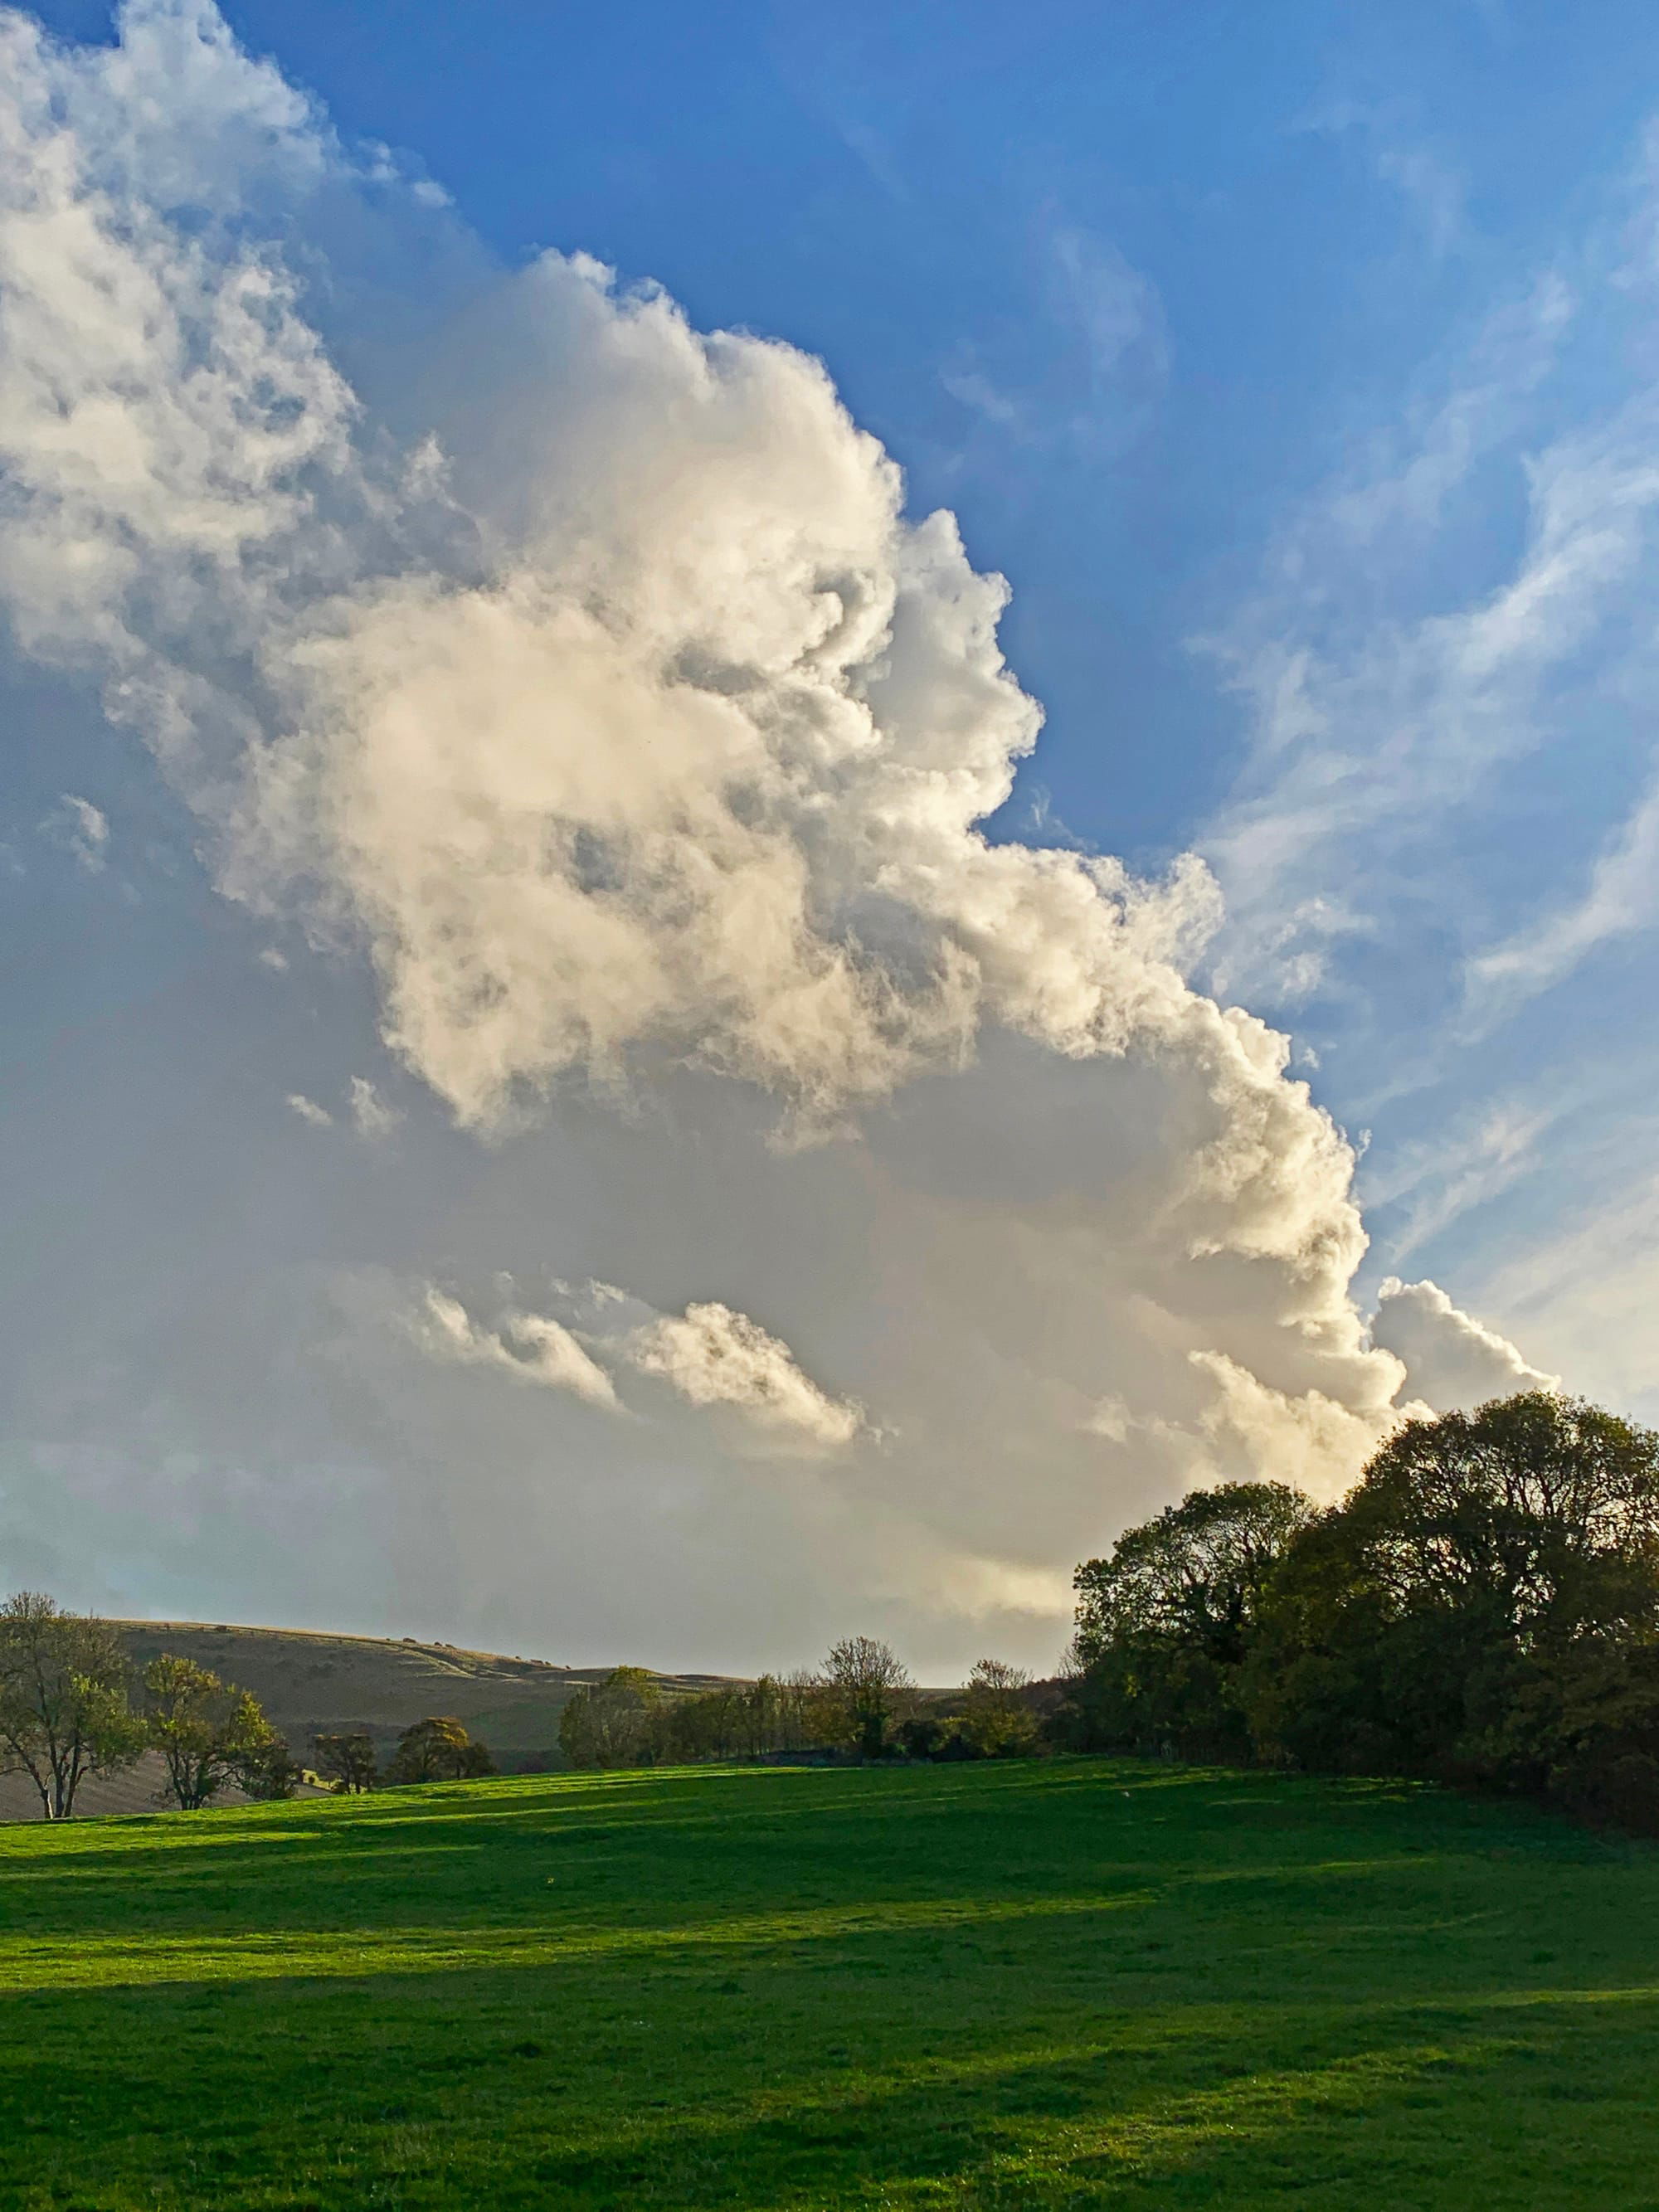 Lively Clouds. Beddingham, East Sussex